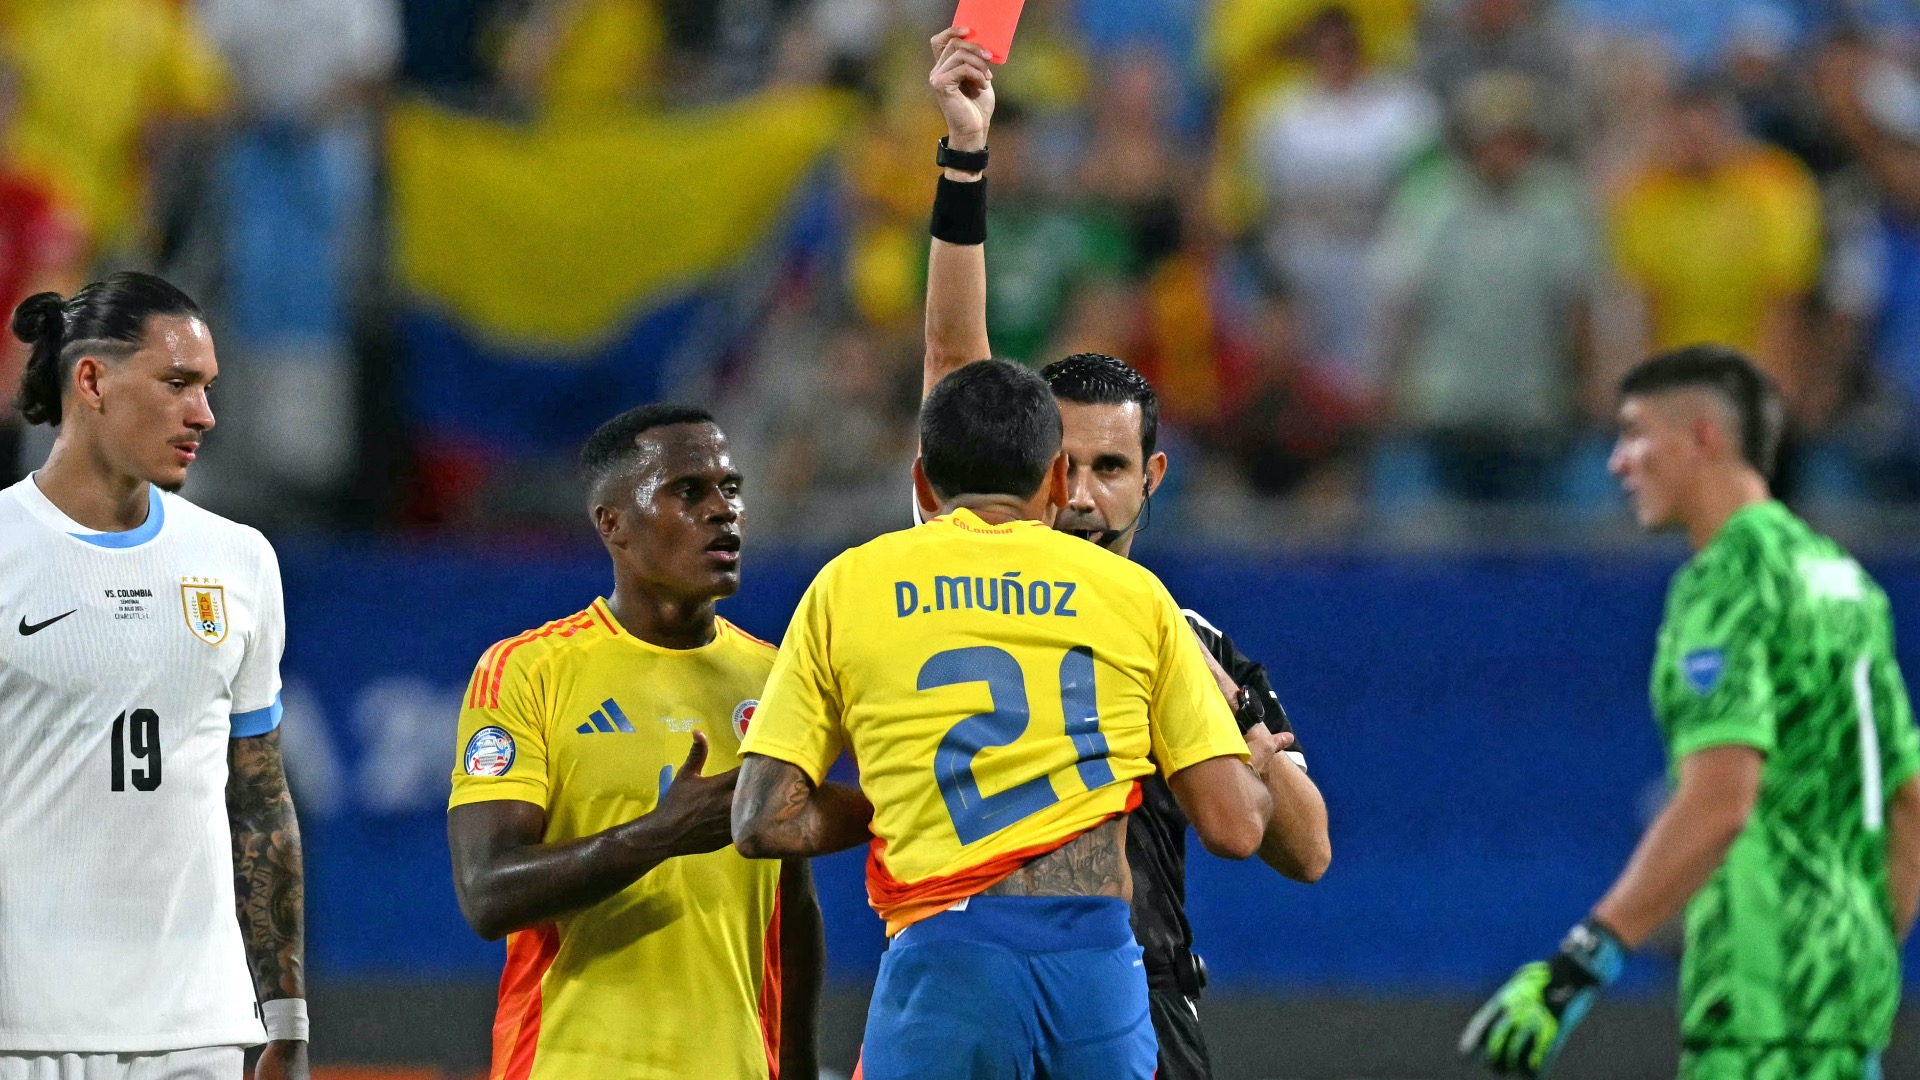 Video: Crystal Palace defender loses composure; elbows PSG star, receives red card in Colombia-Uruguay